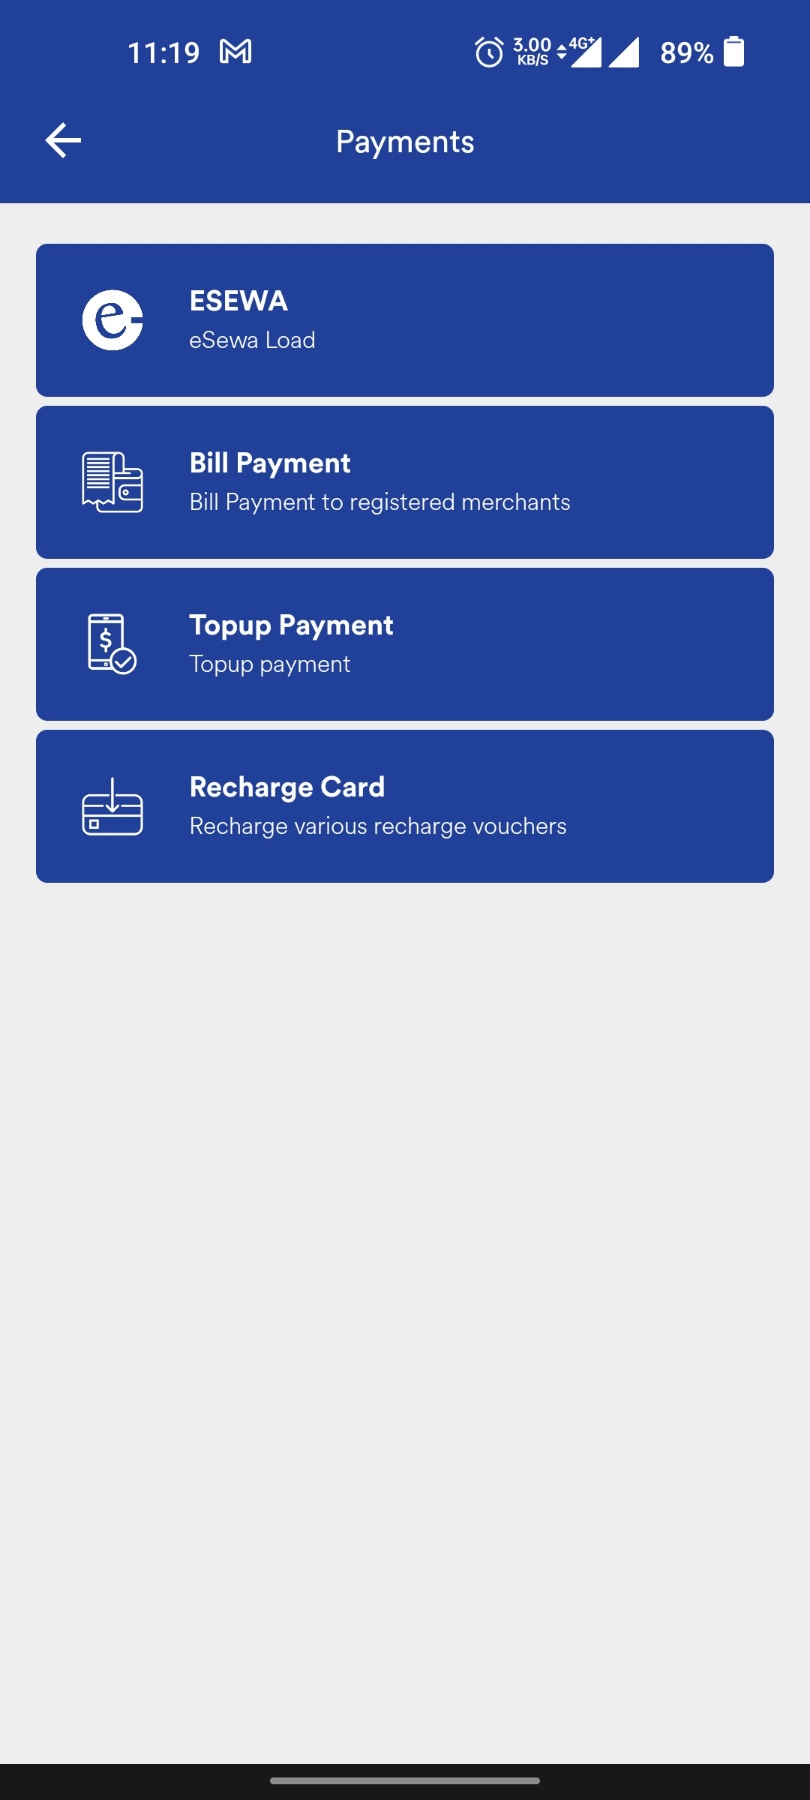 Topup Payment - Image